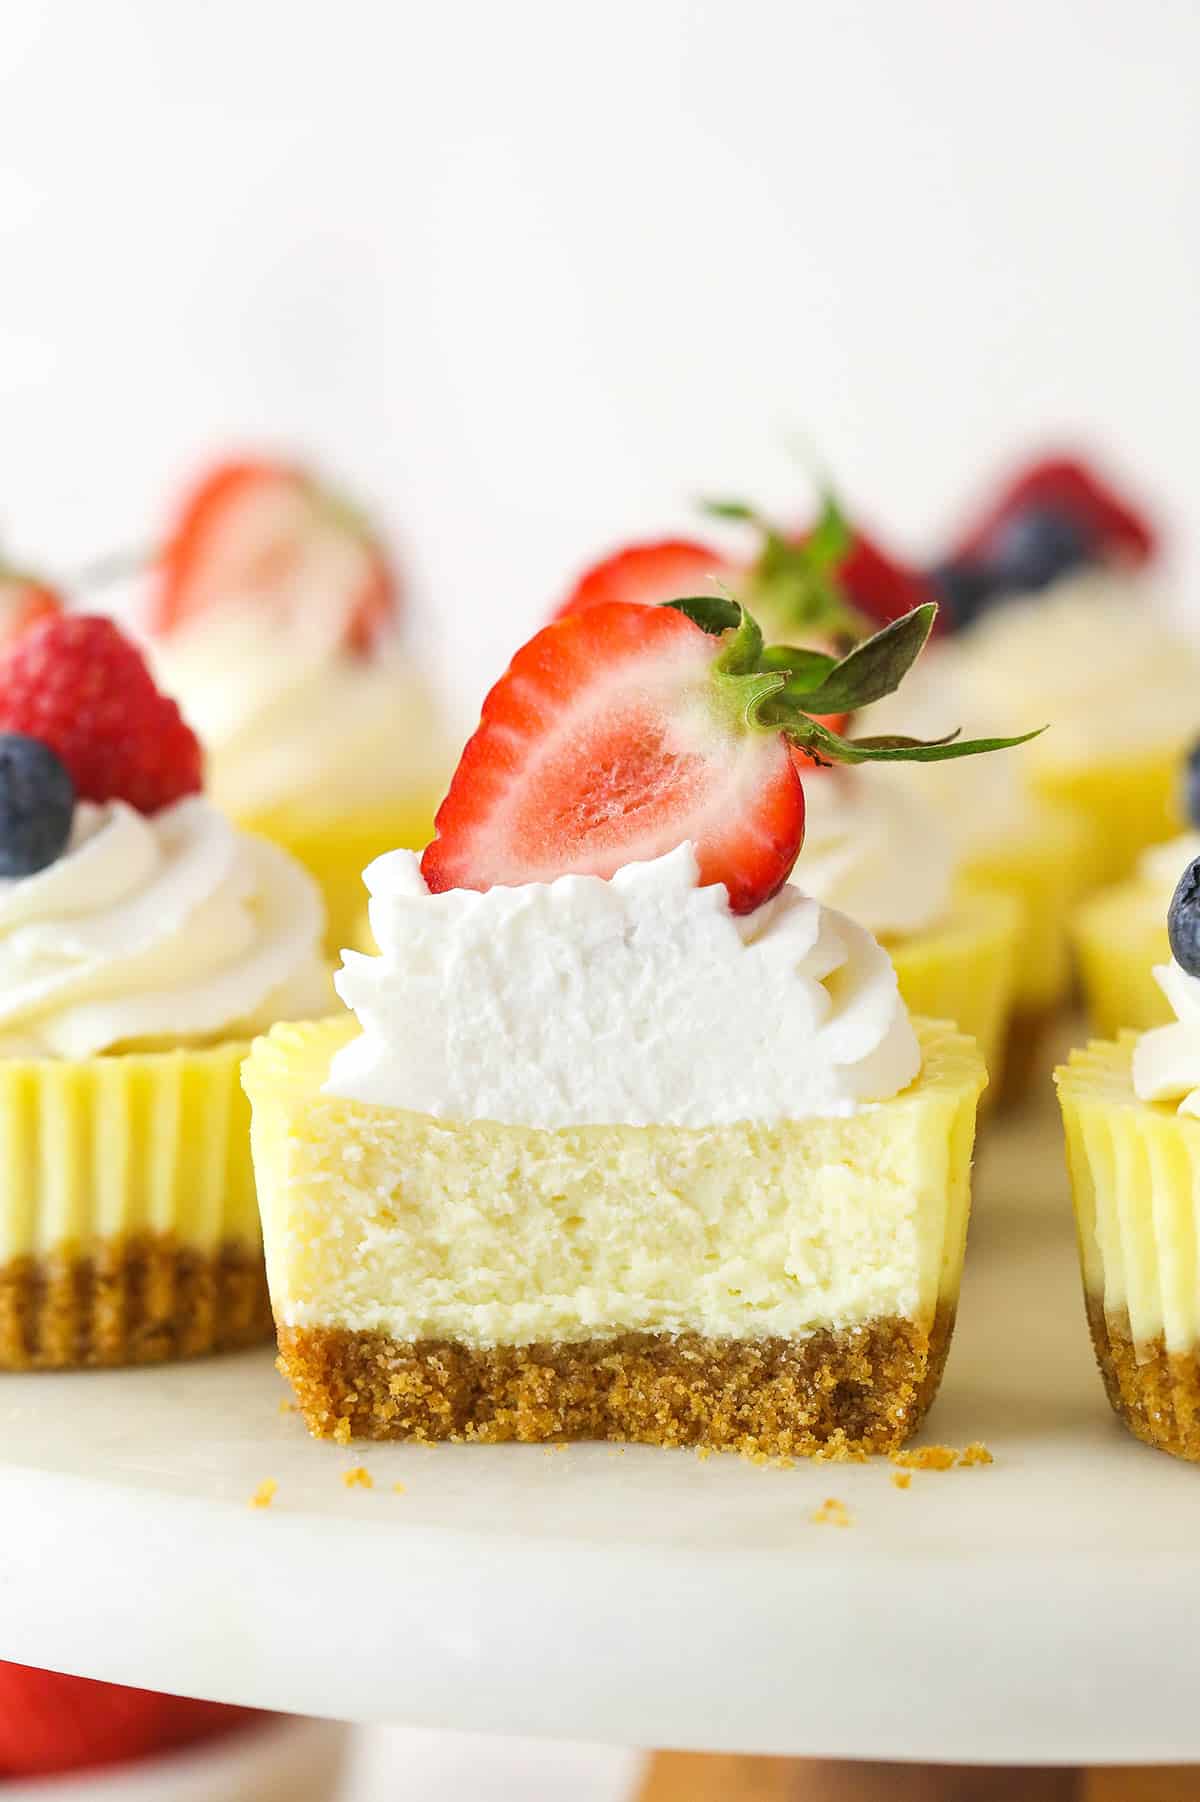 Easy 4-inch mini cheesecake recipe for one/two - Lifestyle of a Foodie